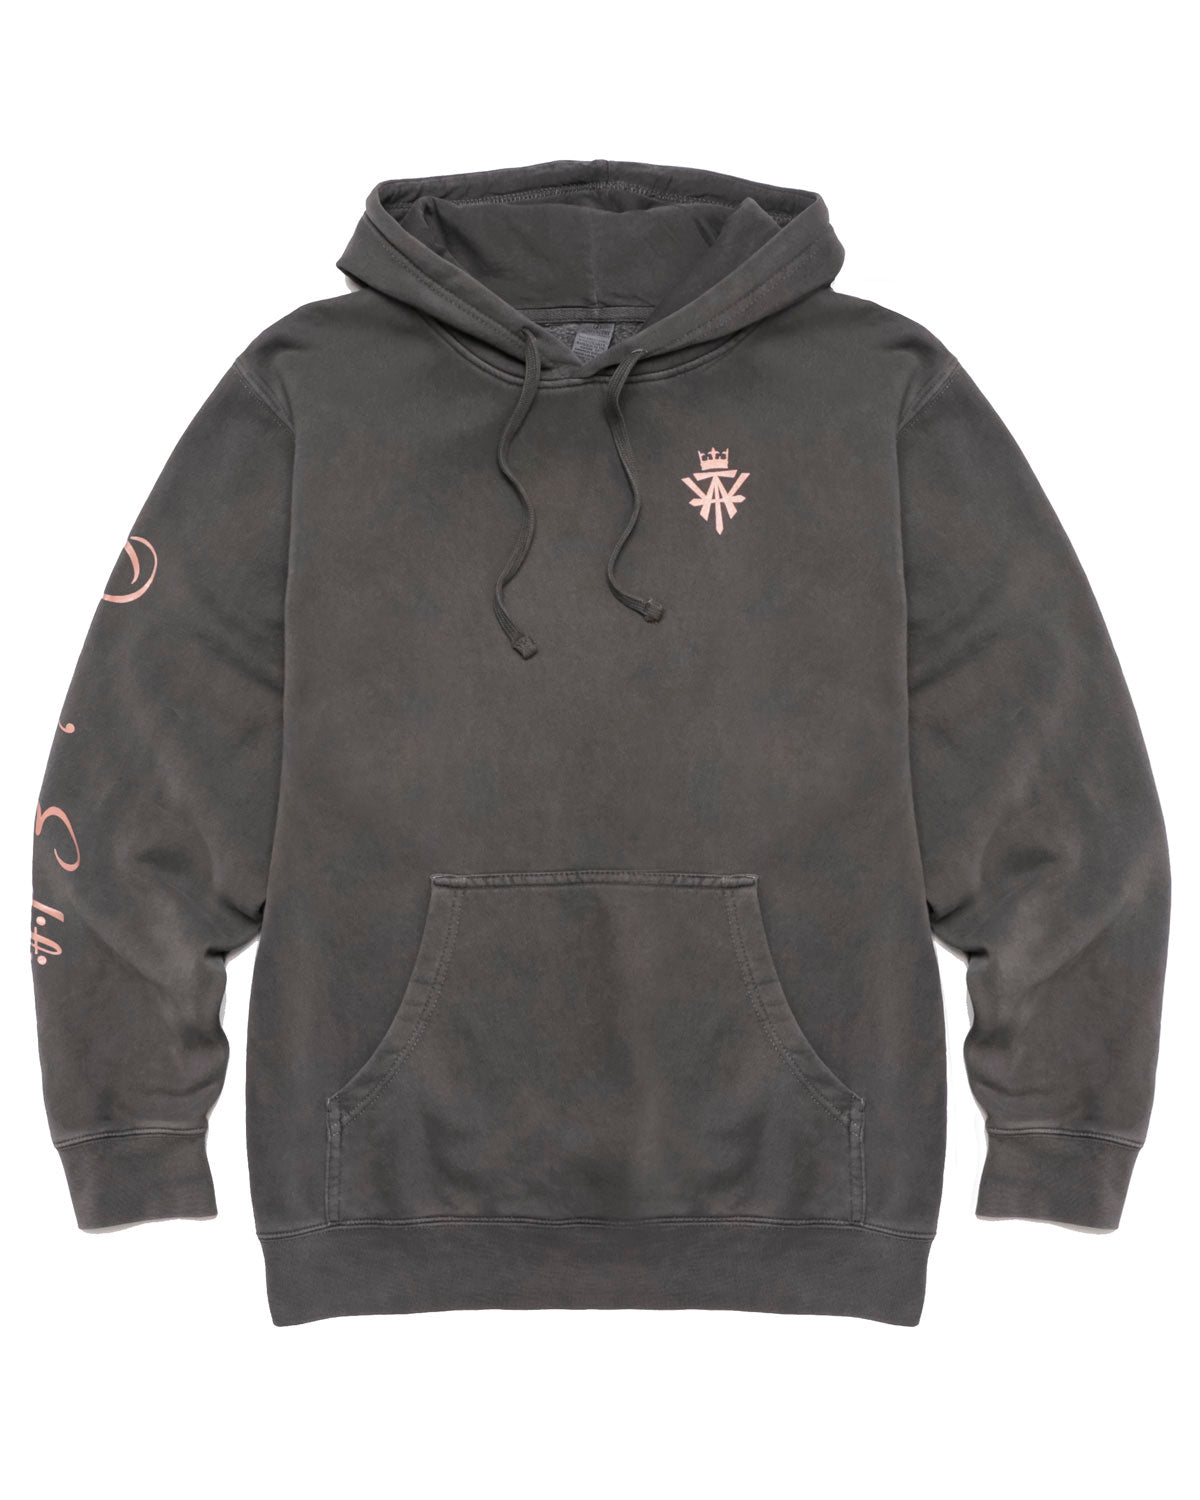 Queen's Edition Hoodie-Rose Gold Sleeve Detail